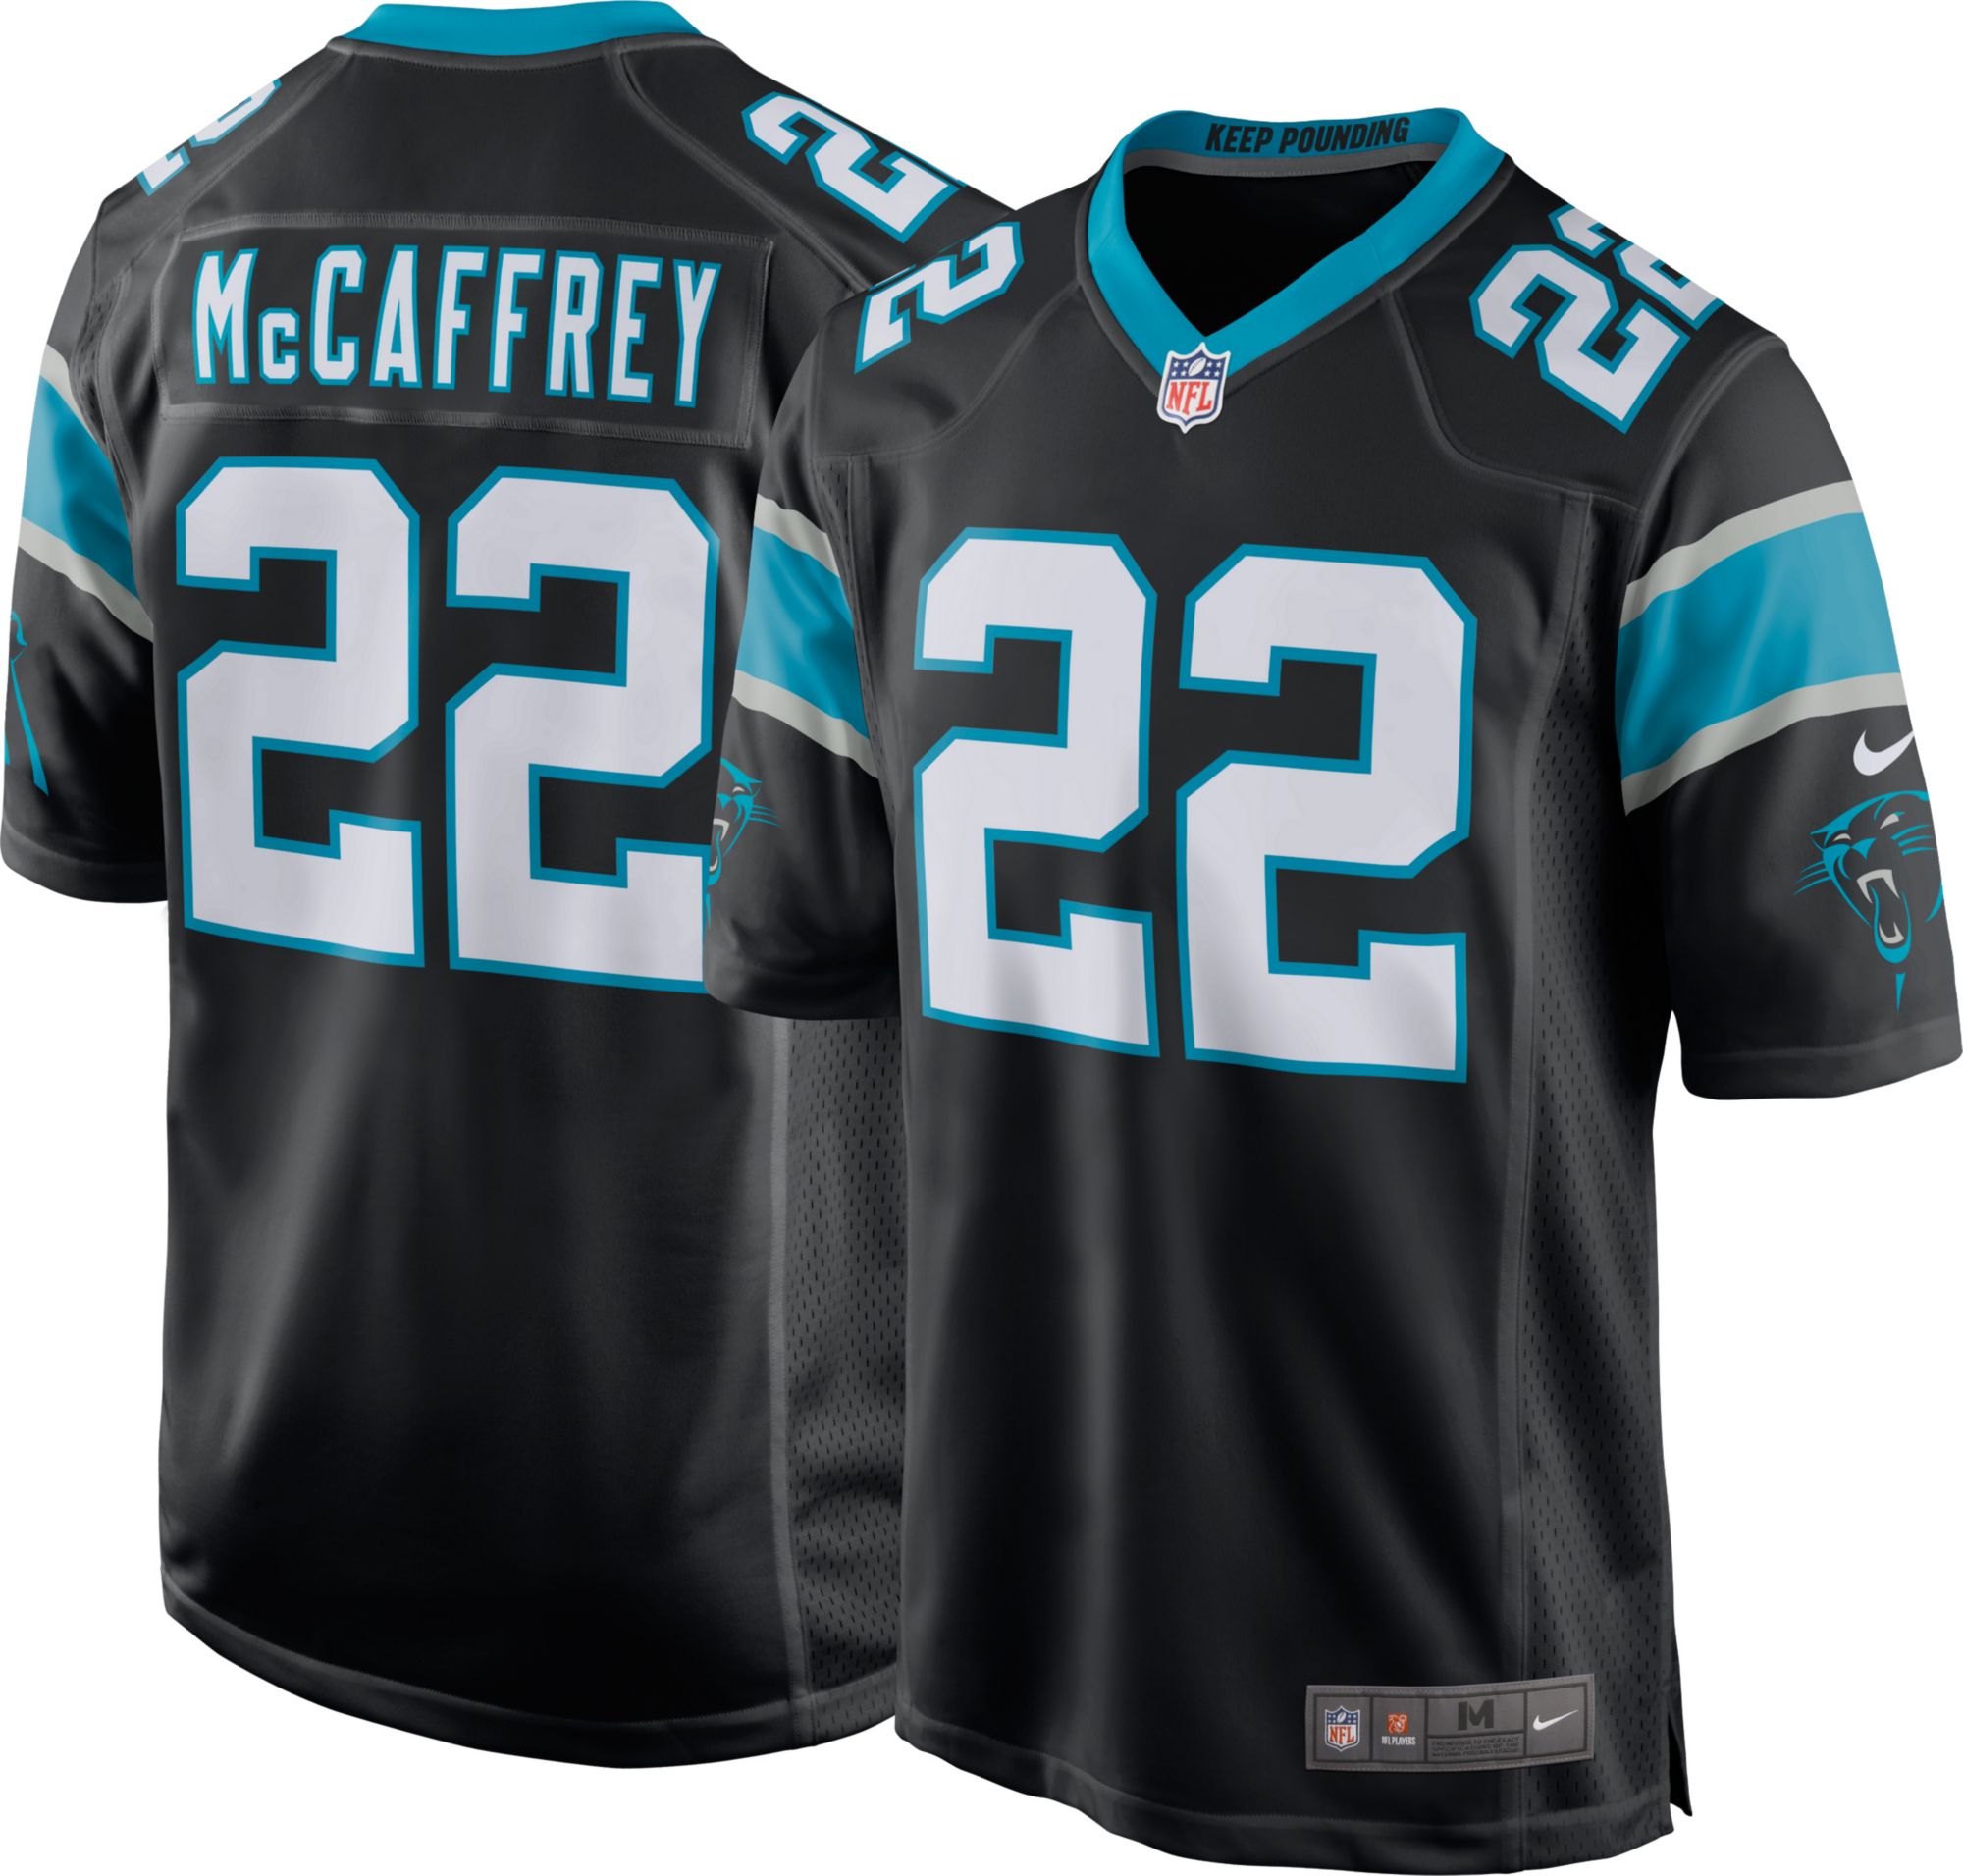 panthers home jersey